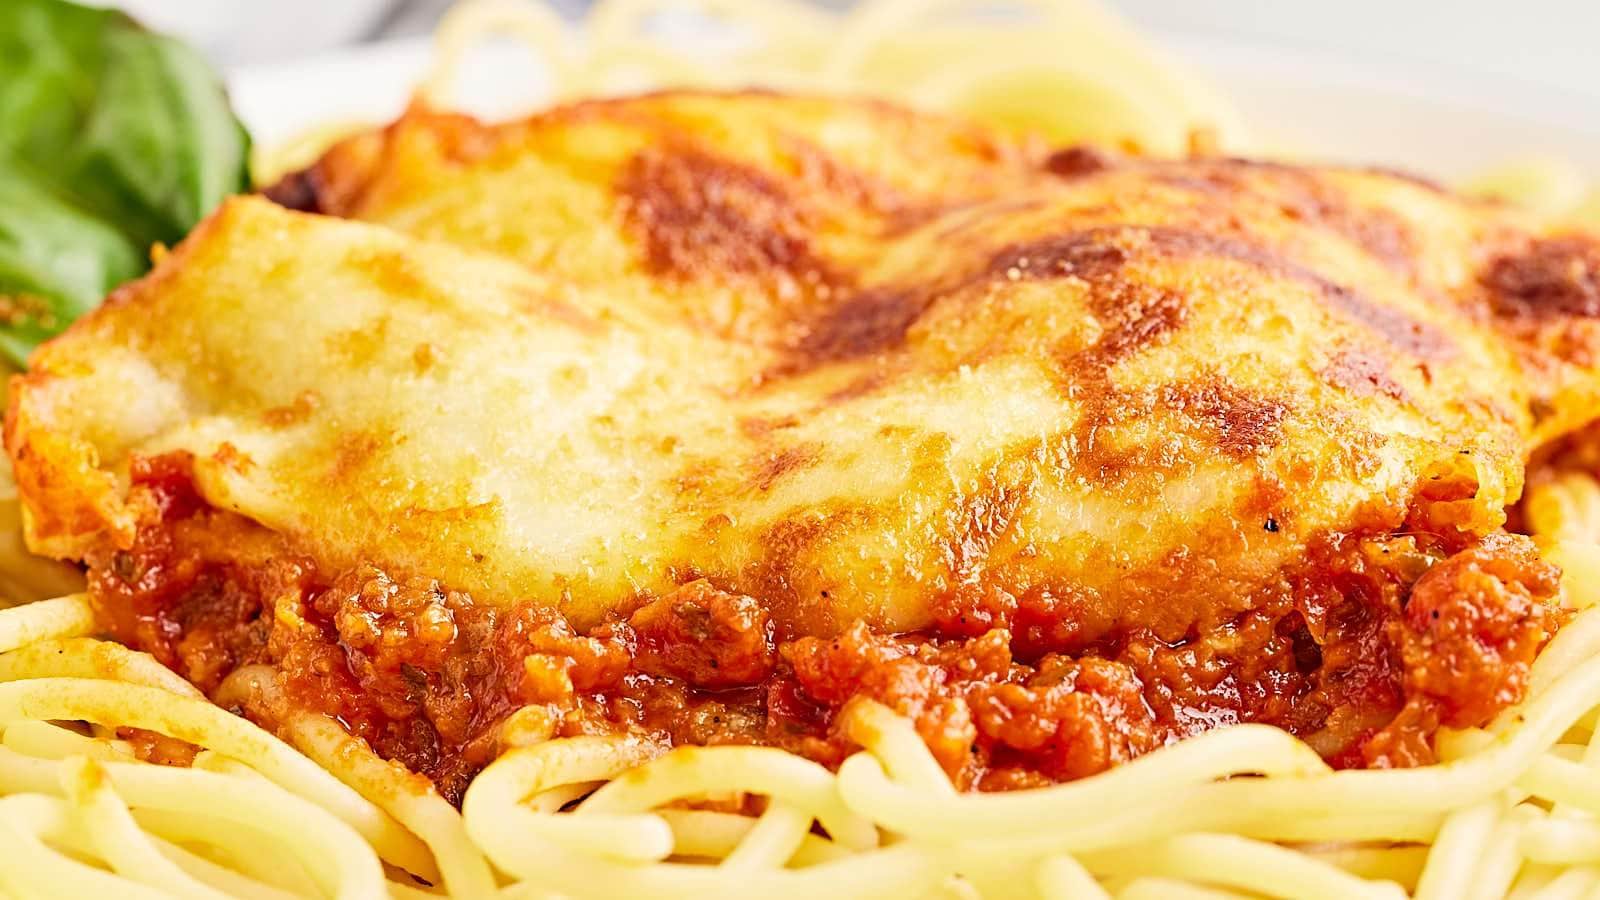 <p>Find out why thousands of readers have made this recipe and love it! If you are looking for a delicious and easy-to-make dinner the whole family will love, our Chicken Parmesan recipe is for you! Juicy, tender, and crispy breaded chicken is baked to perfection in flavorful tomato sauce and topped with mozzarella and parmesan cheese!</p><p><strong>Get the Recipe: <a href="https://cheerfulcook.com/easy-cheesy-chicken-parmesan-recipe/" rel="noreferrer noopener">Chicken Parmesan</a></strong></p>